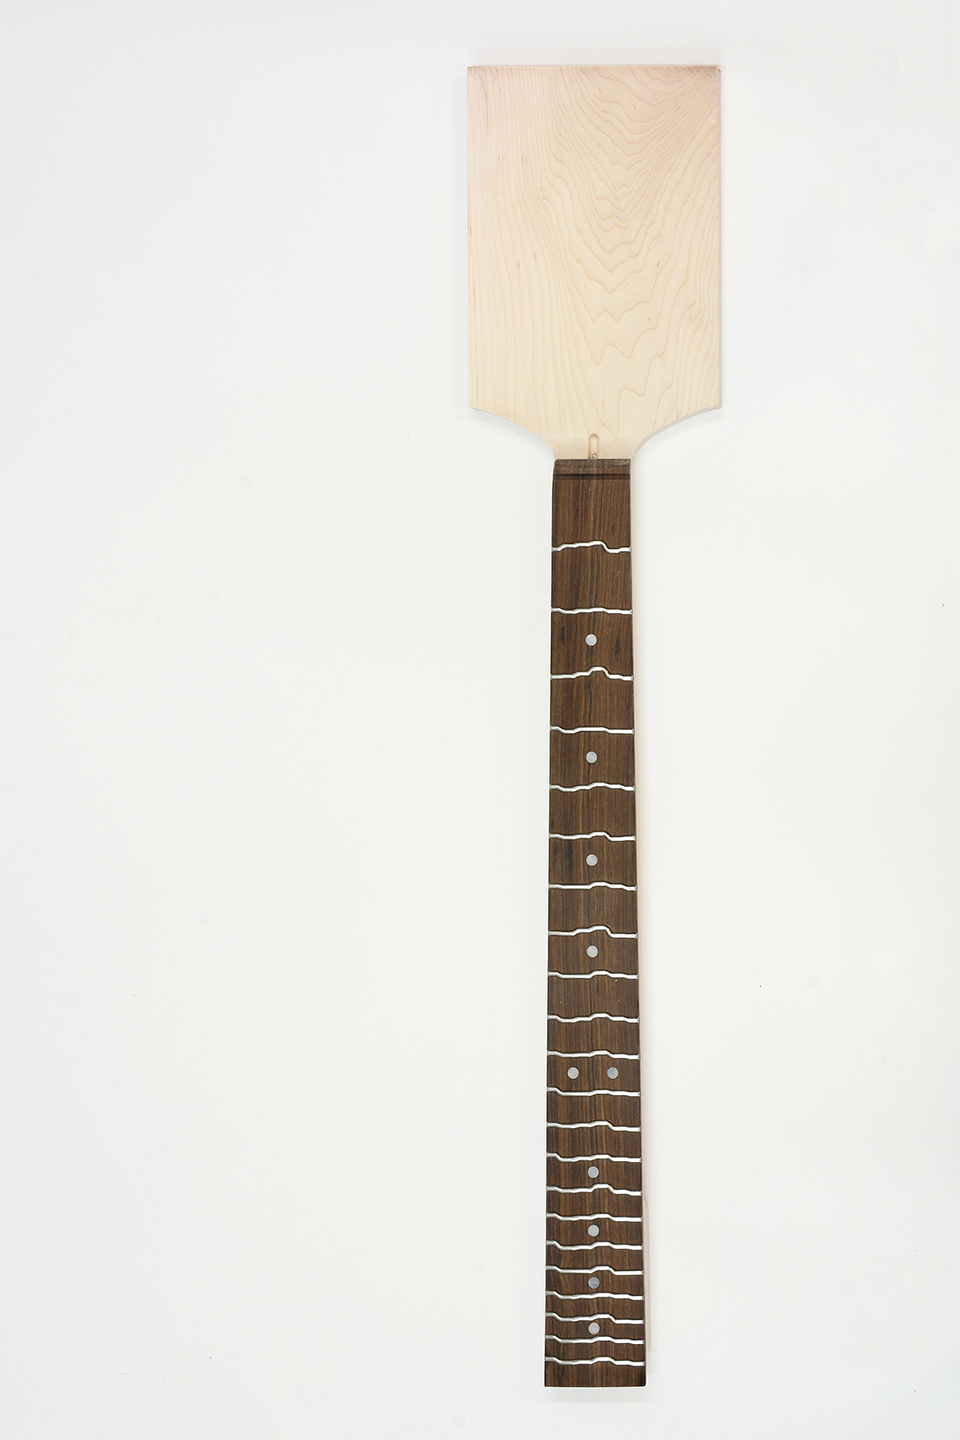 TT-necks with Paddle headstock and cover plates now available